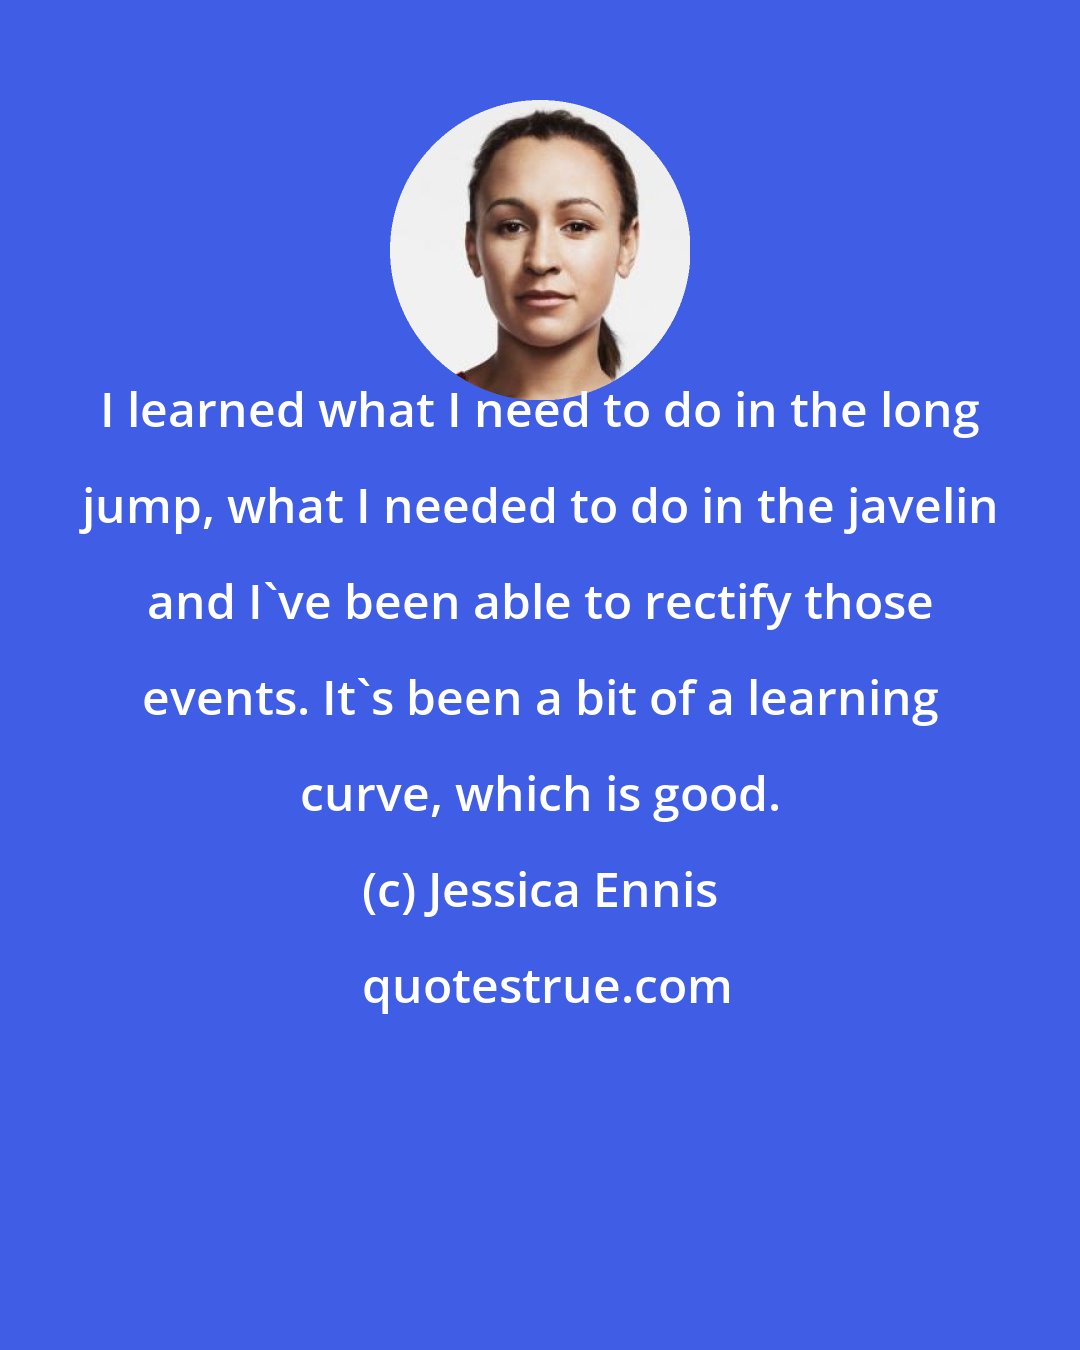 Jessica Ennis: I learned what I need to do in the long jump, what I needed to do in the javelin and I've been able to rectify those events. It's been a bit of a learning curve, which is good.